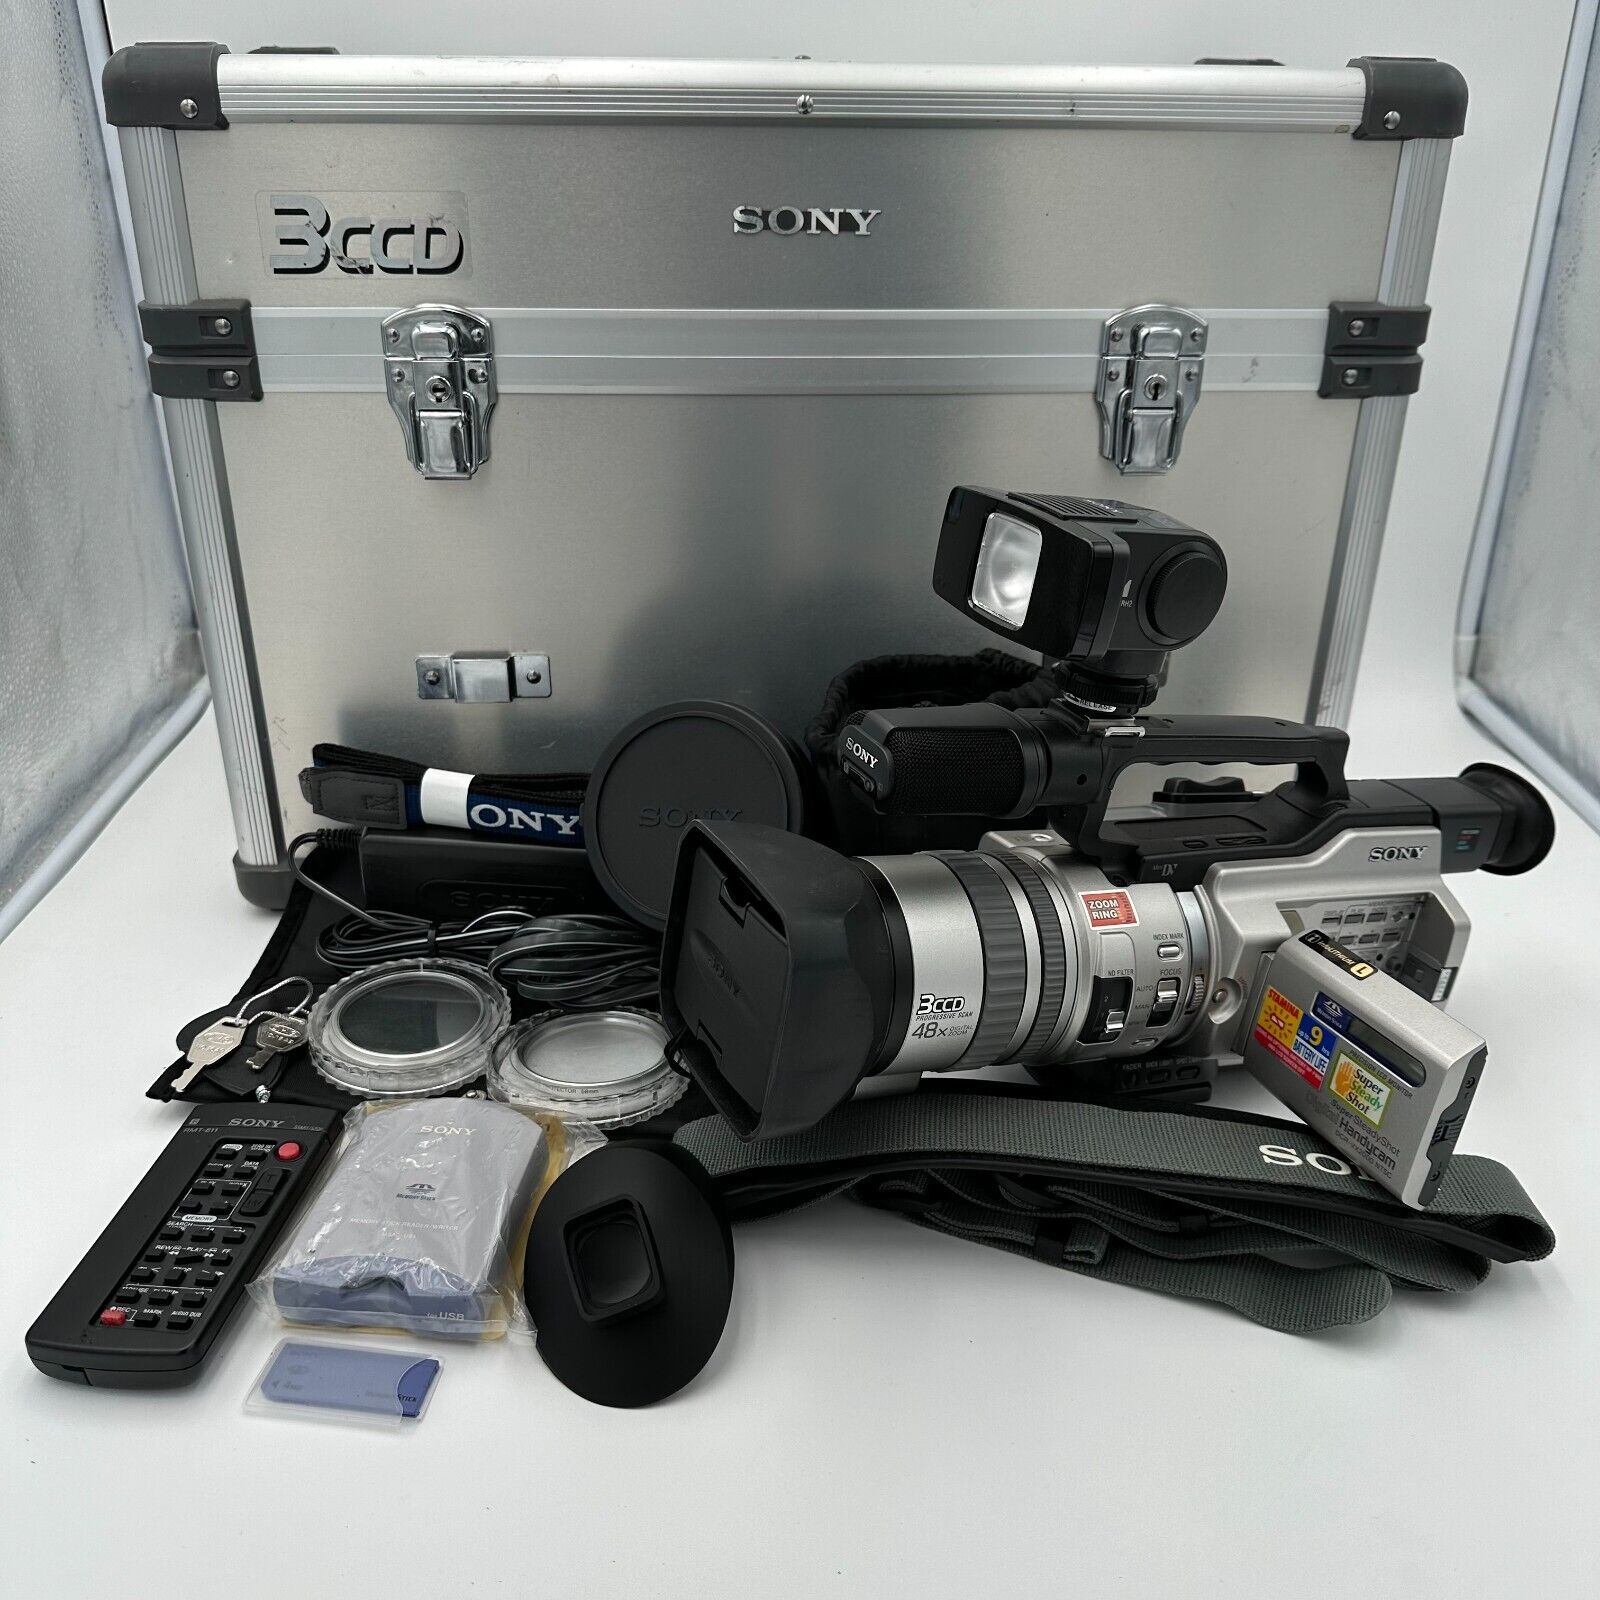 Sony DCR-VX2000 MiniDV Camcorder  3 CCD  Working w/ Case and Accessories